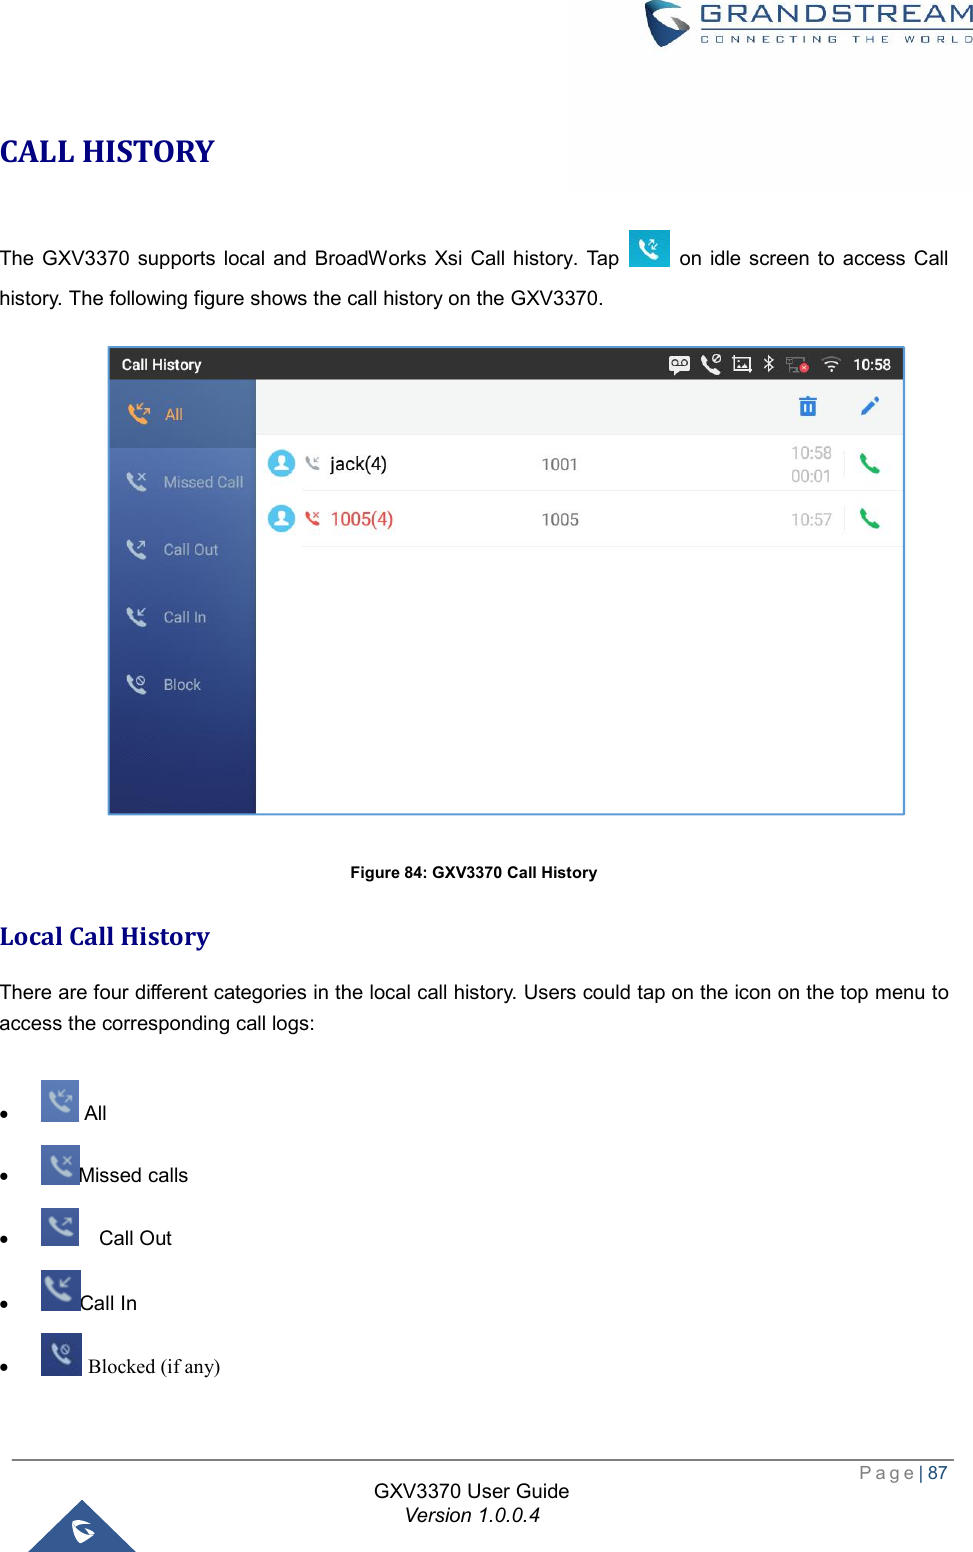  Page| 87  GXV3370 User Guide Version 1.0.0.4  CALL HISTORY The GXV3370 supports local and BroadWorks Xsi Call history. Tap   on idle screen to access Call history. The following figure shows the call history on the GXV3370.  Figure 84: GXV3370 Call History Local Call History There are four different categories in the local call history. Users could tap on the icon on the top menu to access the corresponding call logs:  ·  All   · Missed calls ·   Call Out · Call In ·  Blocked (if any) 